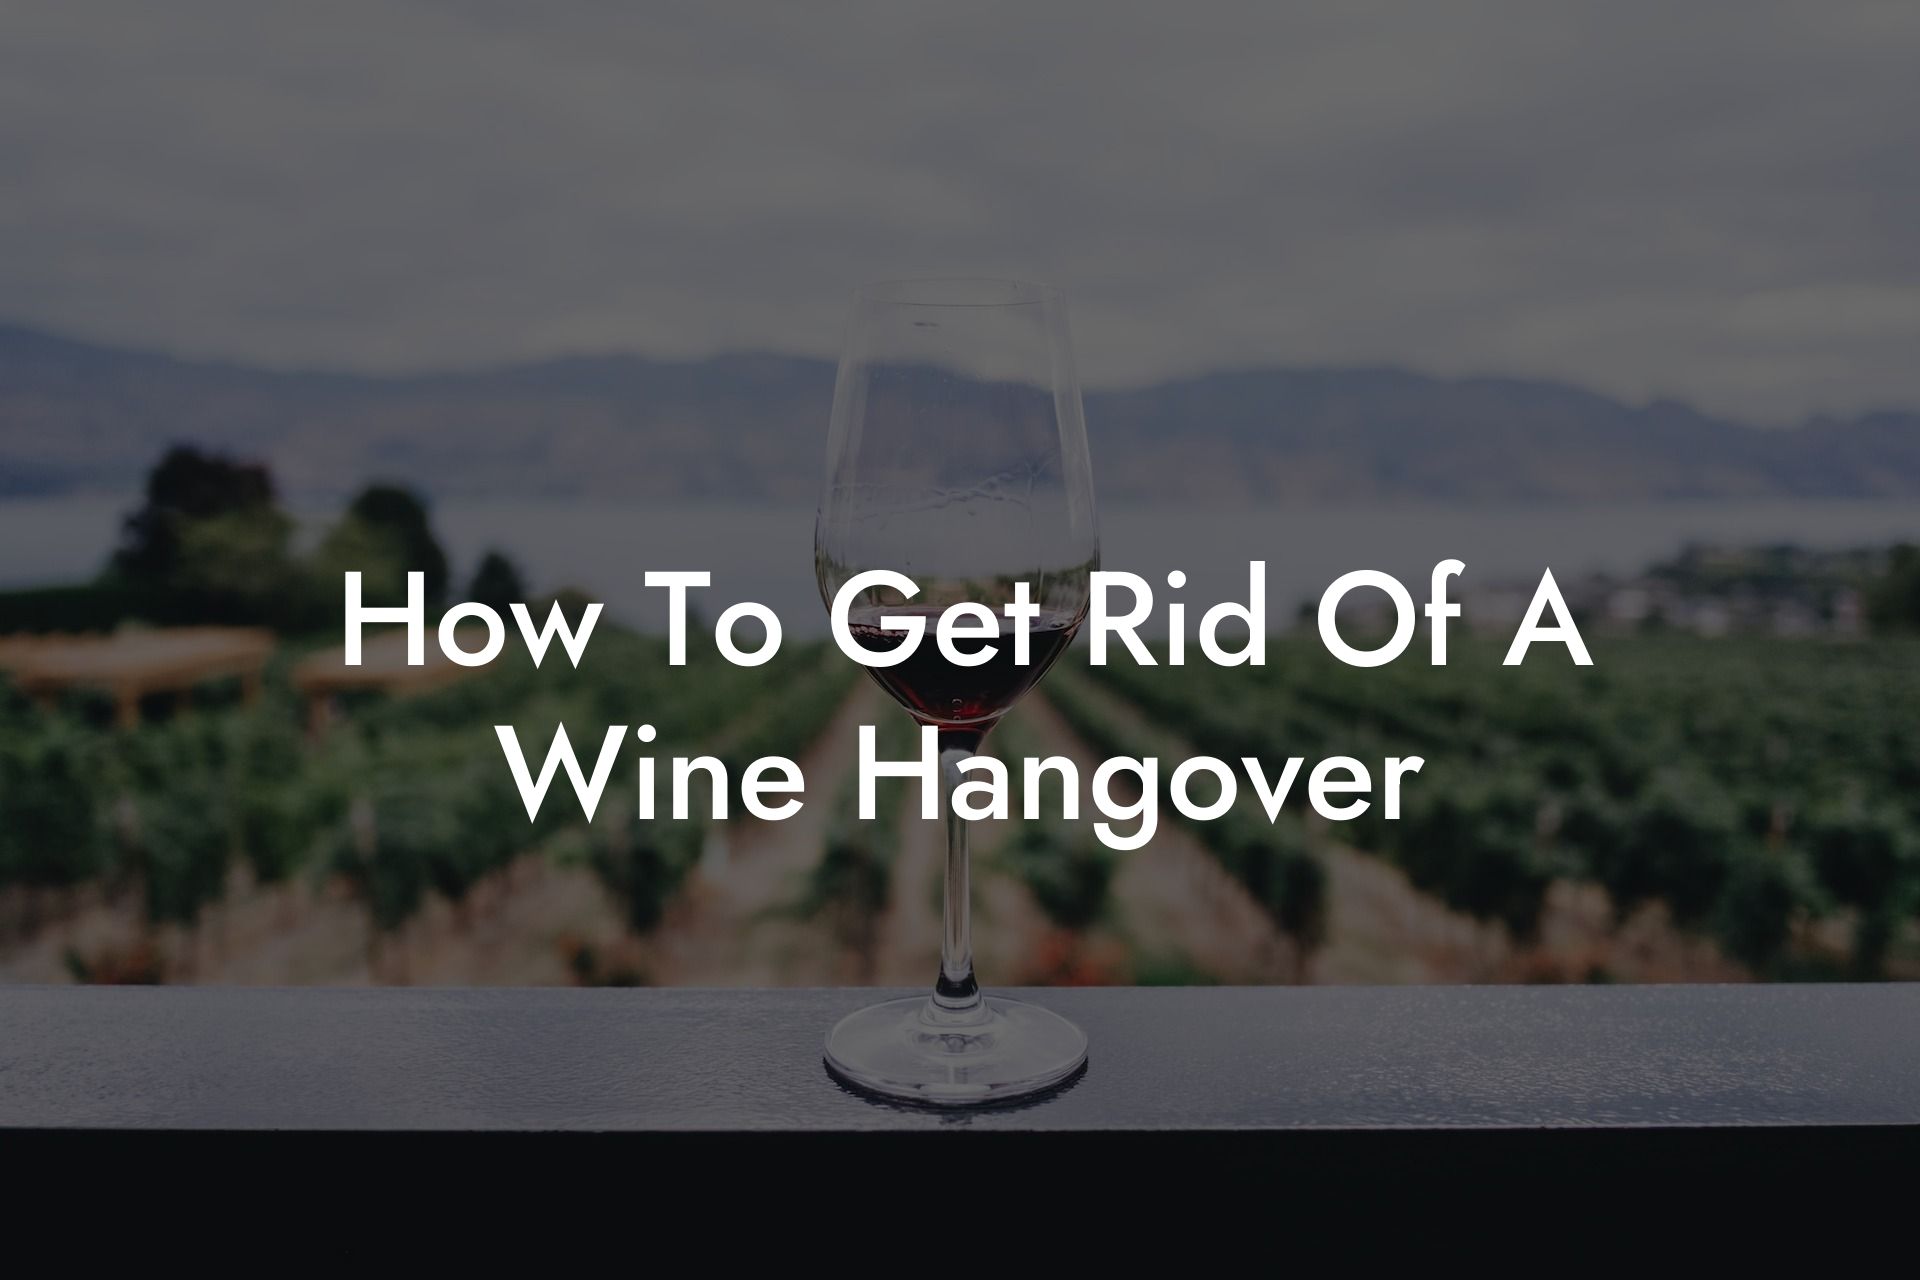 How To Get Rid Of A Wine Hangover